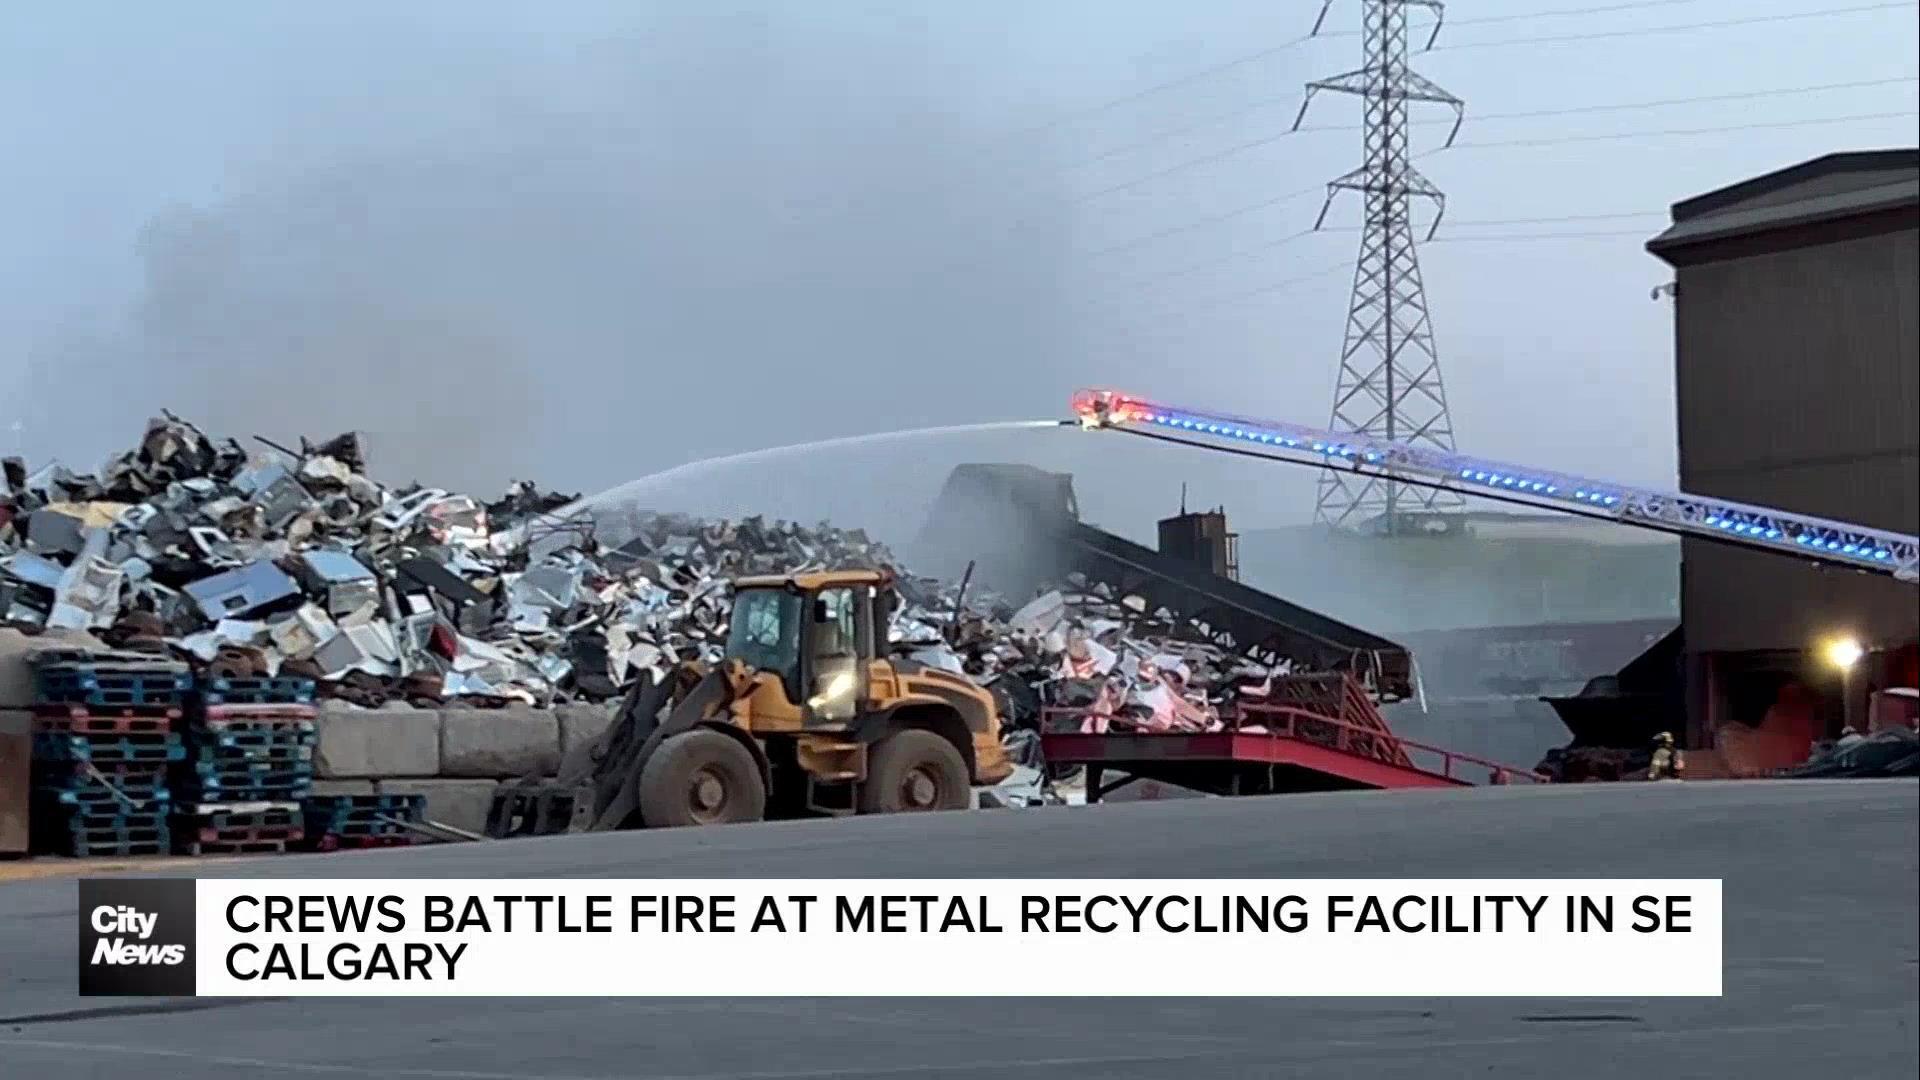 Crews battle fire at metal recycling facility in SE Calgary